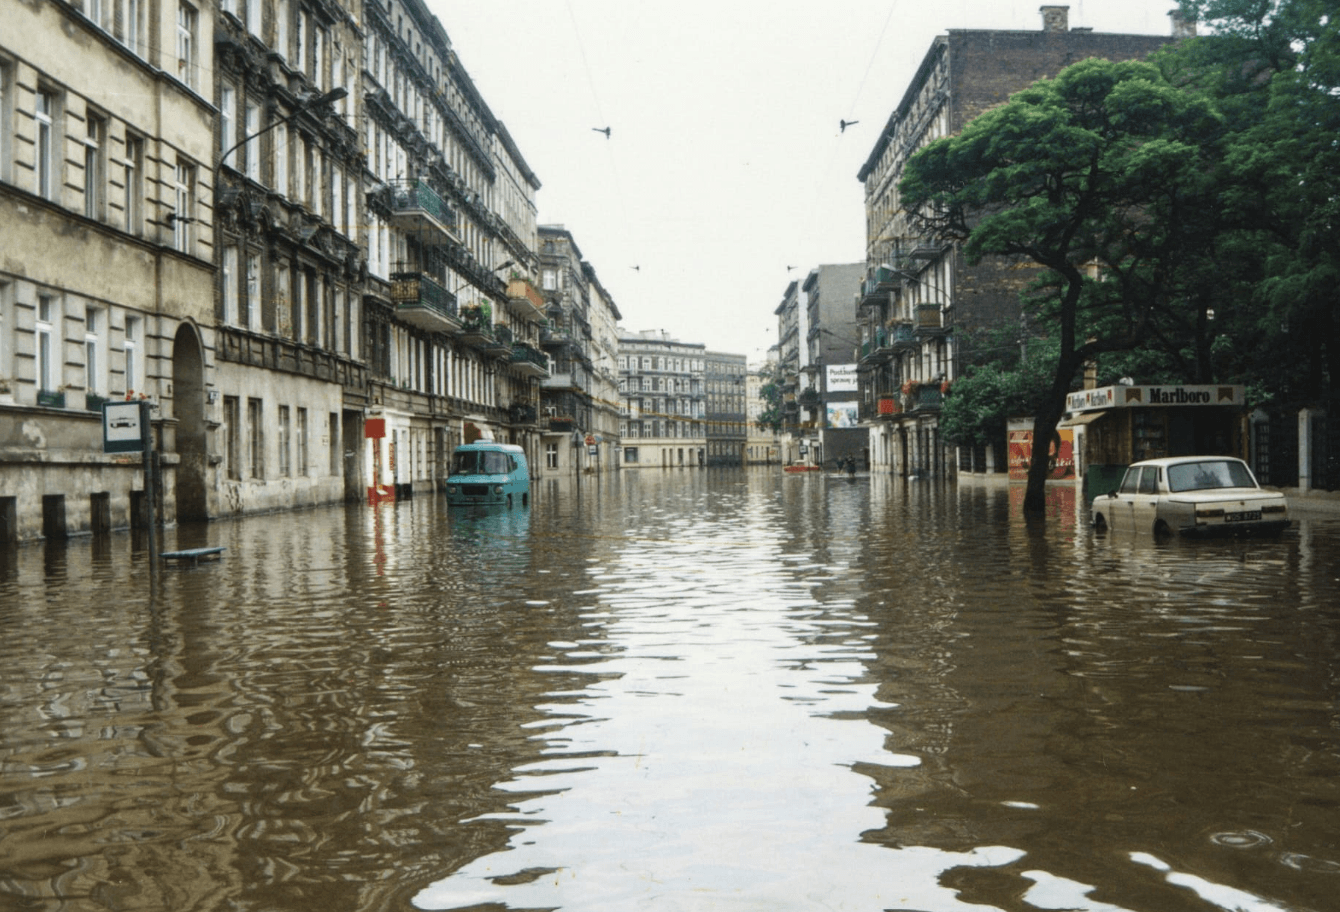 Flood in Wroclaw 1997 - This is what Wroclaw looked like 25 years ago [PHOTOS].